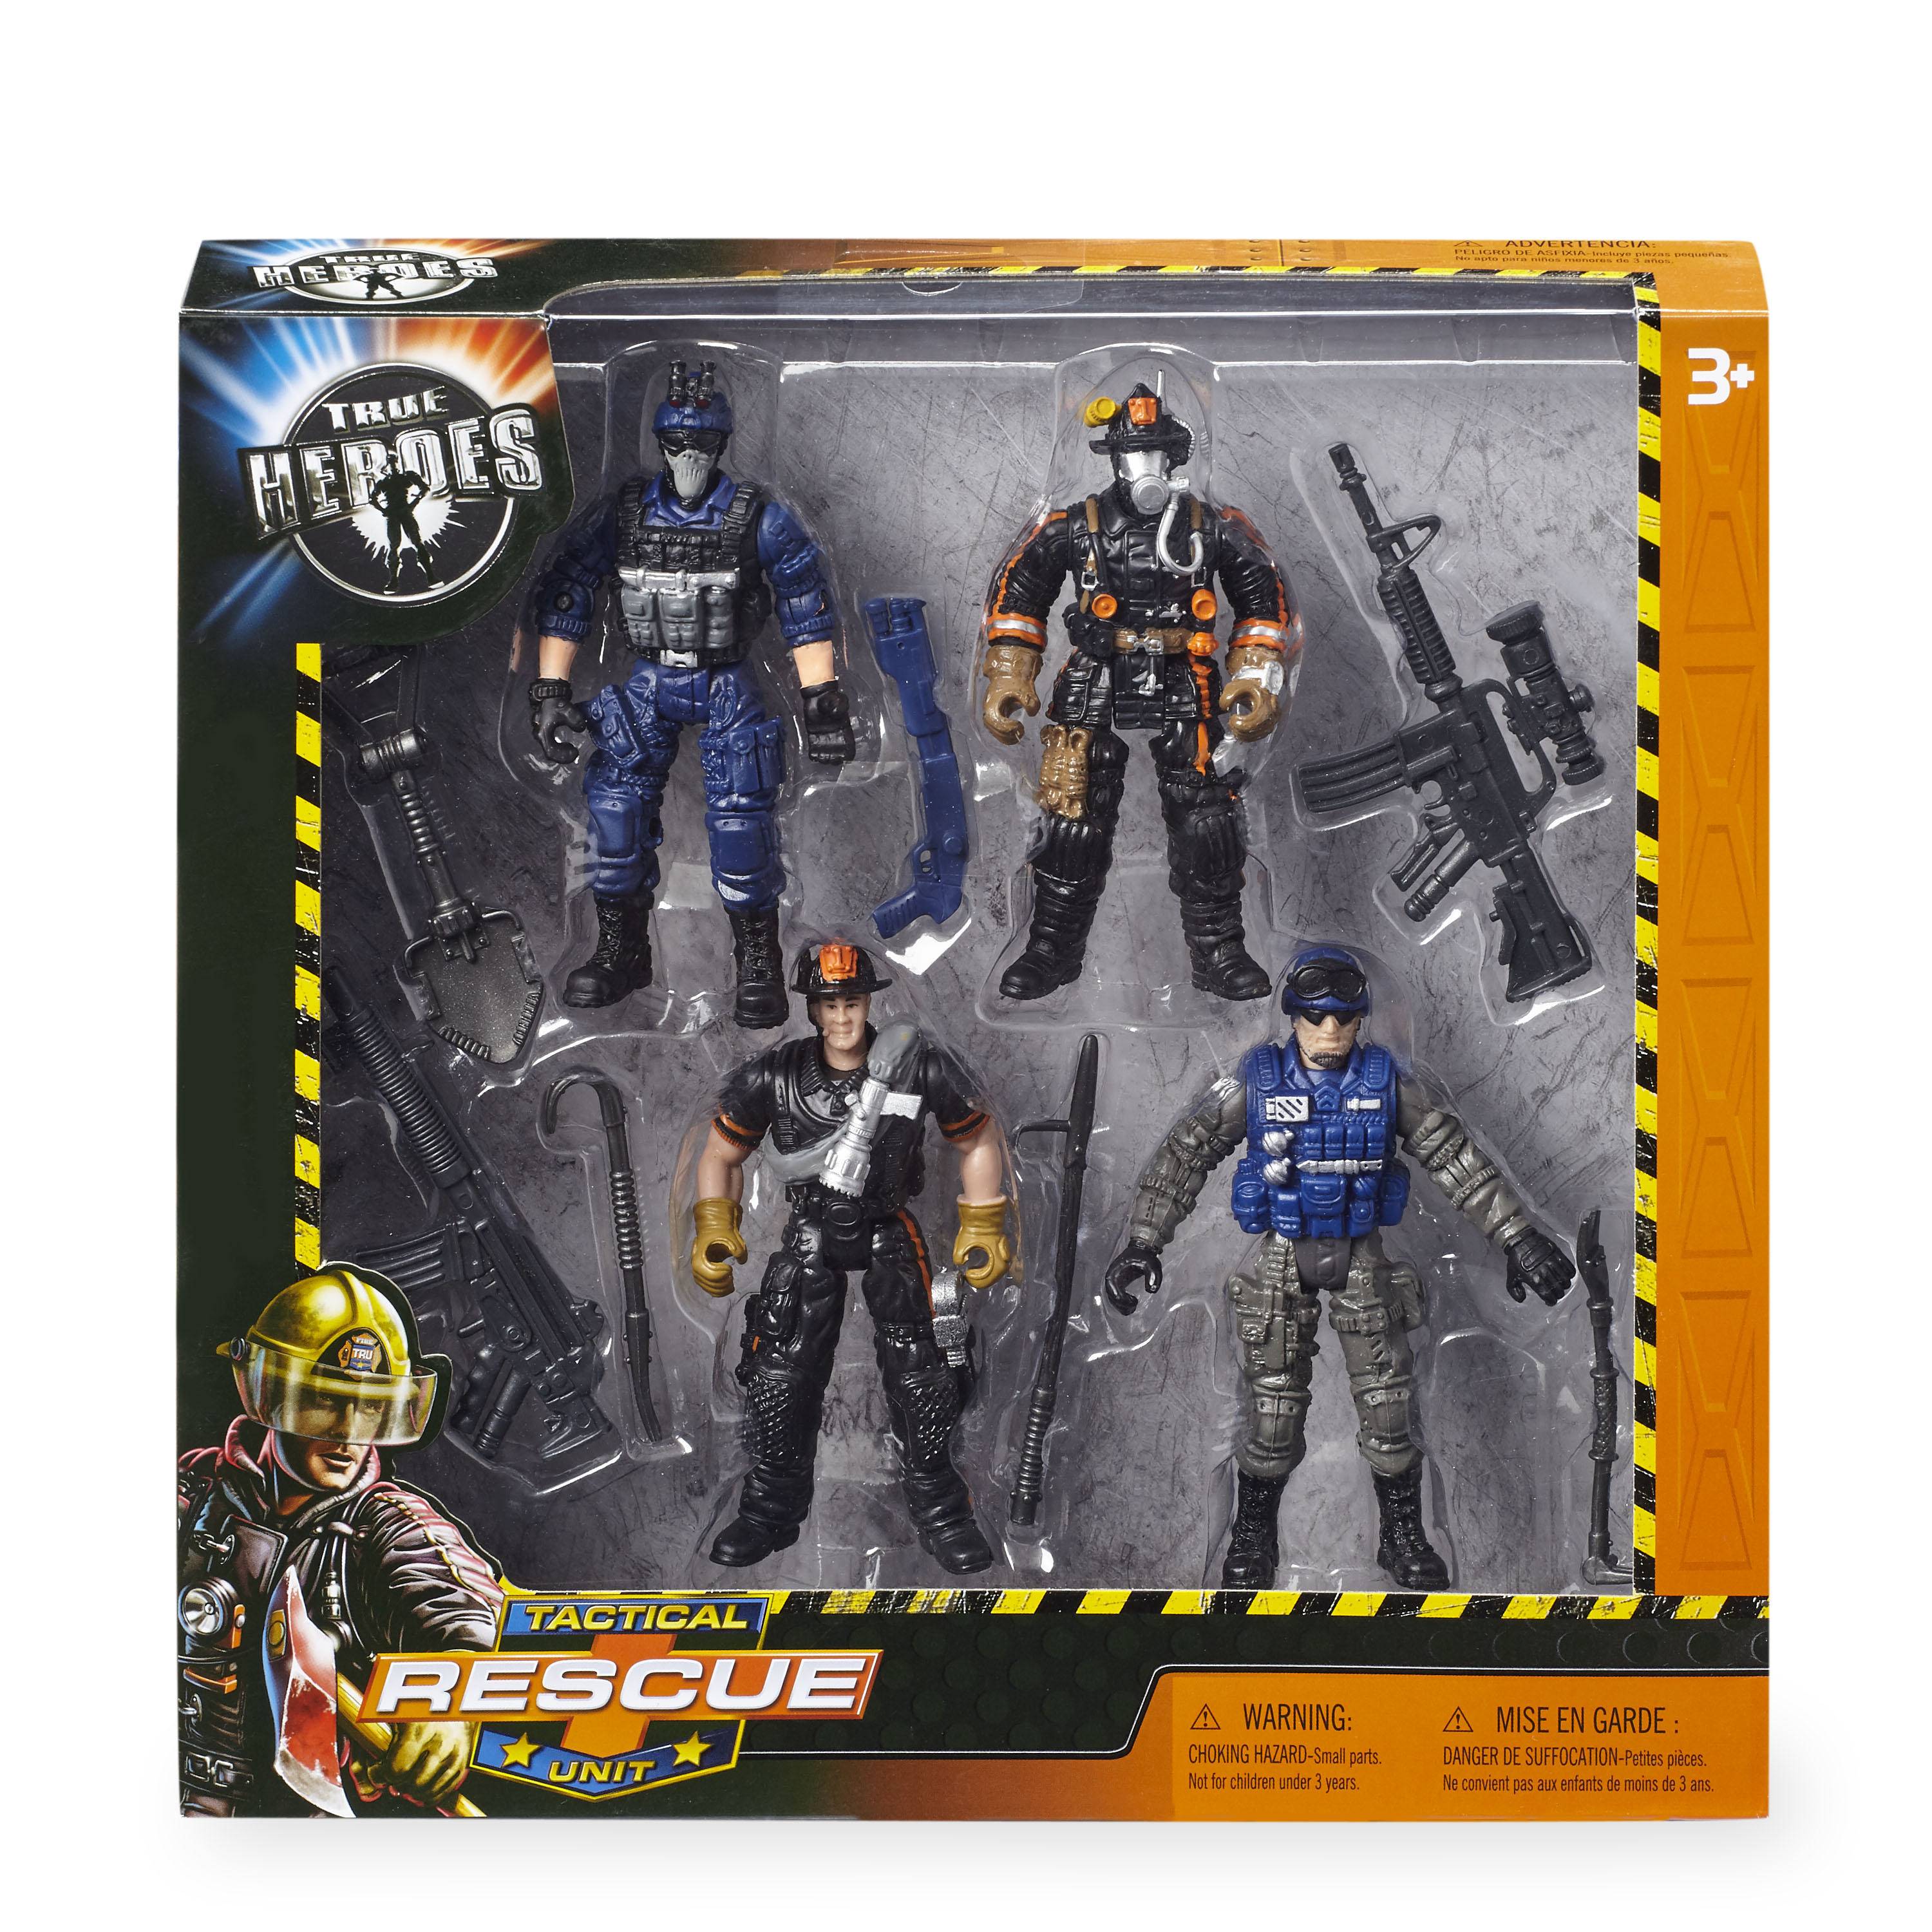 Product Action Figures